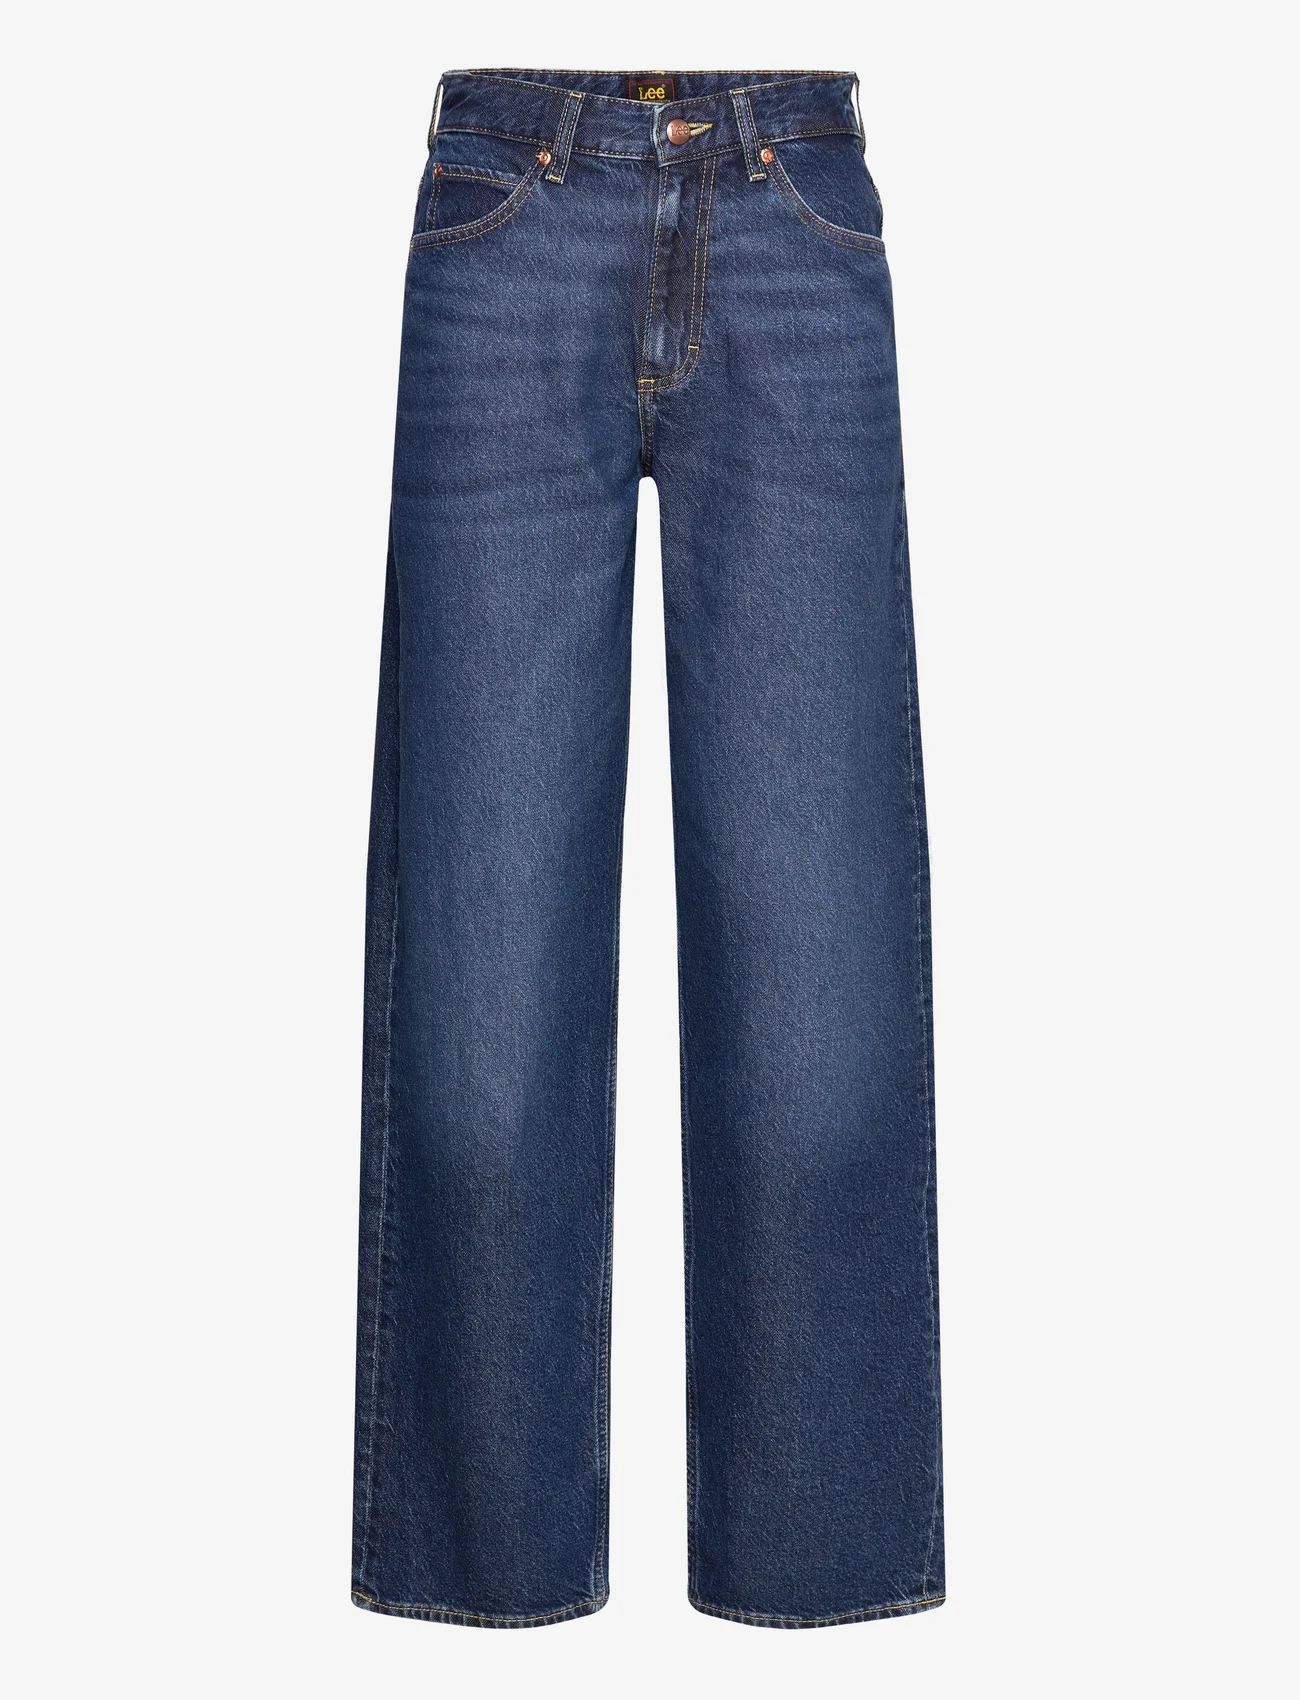 Lee Jeans - RIDER LOOSE - straight jeans - blue nostalgia - 0